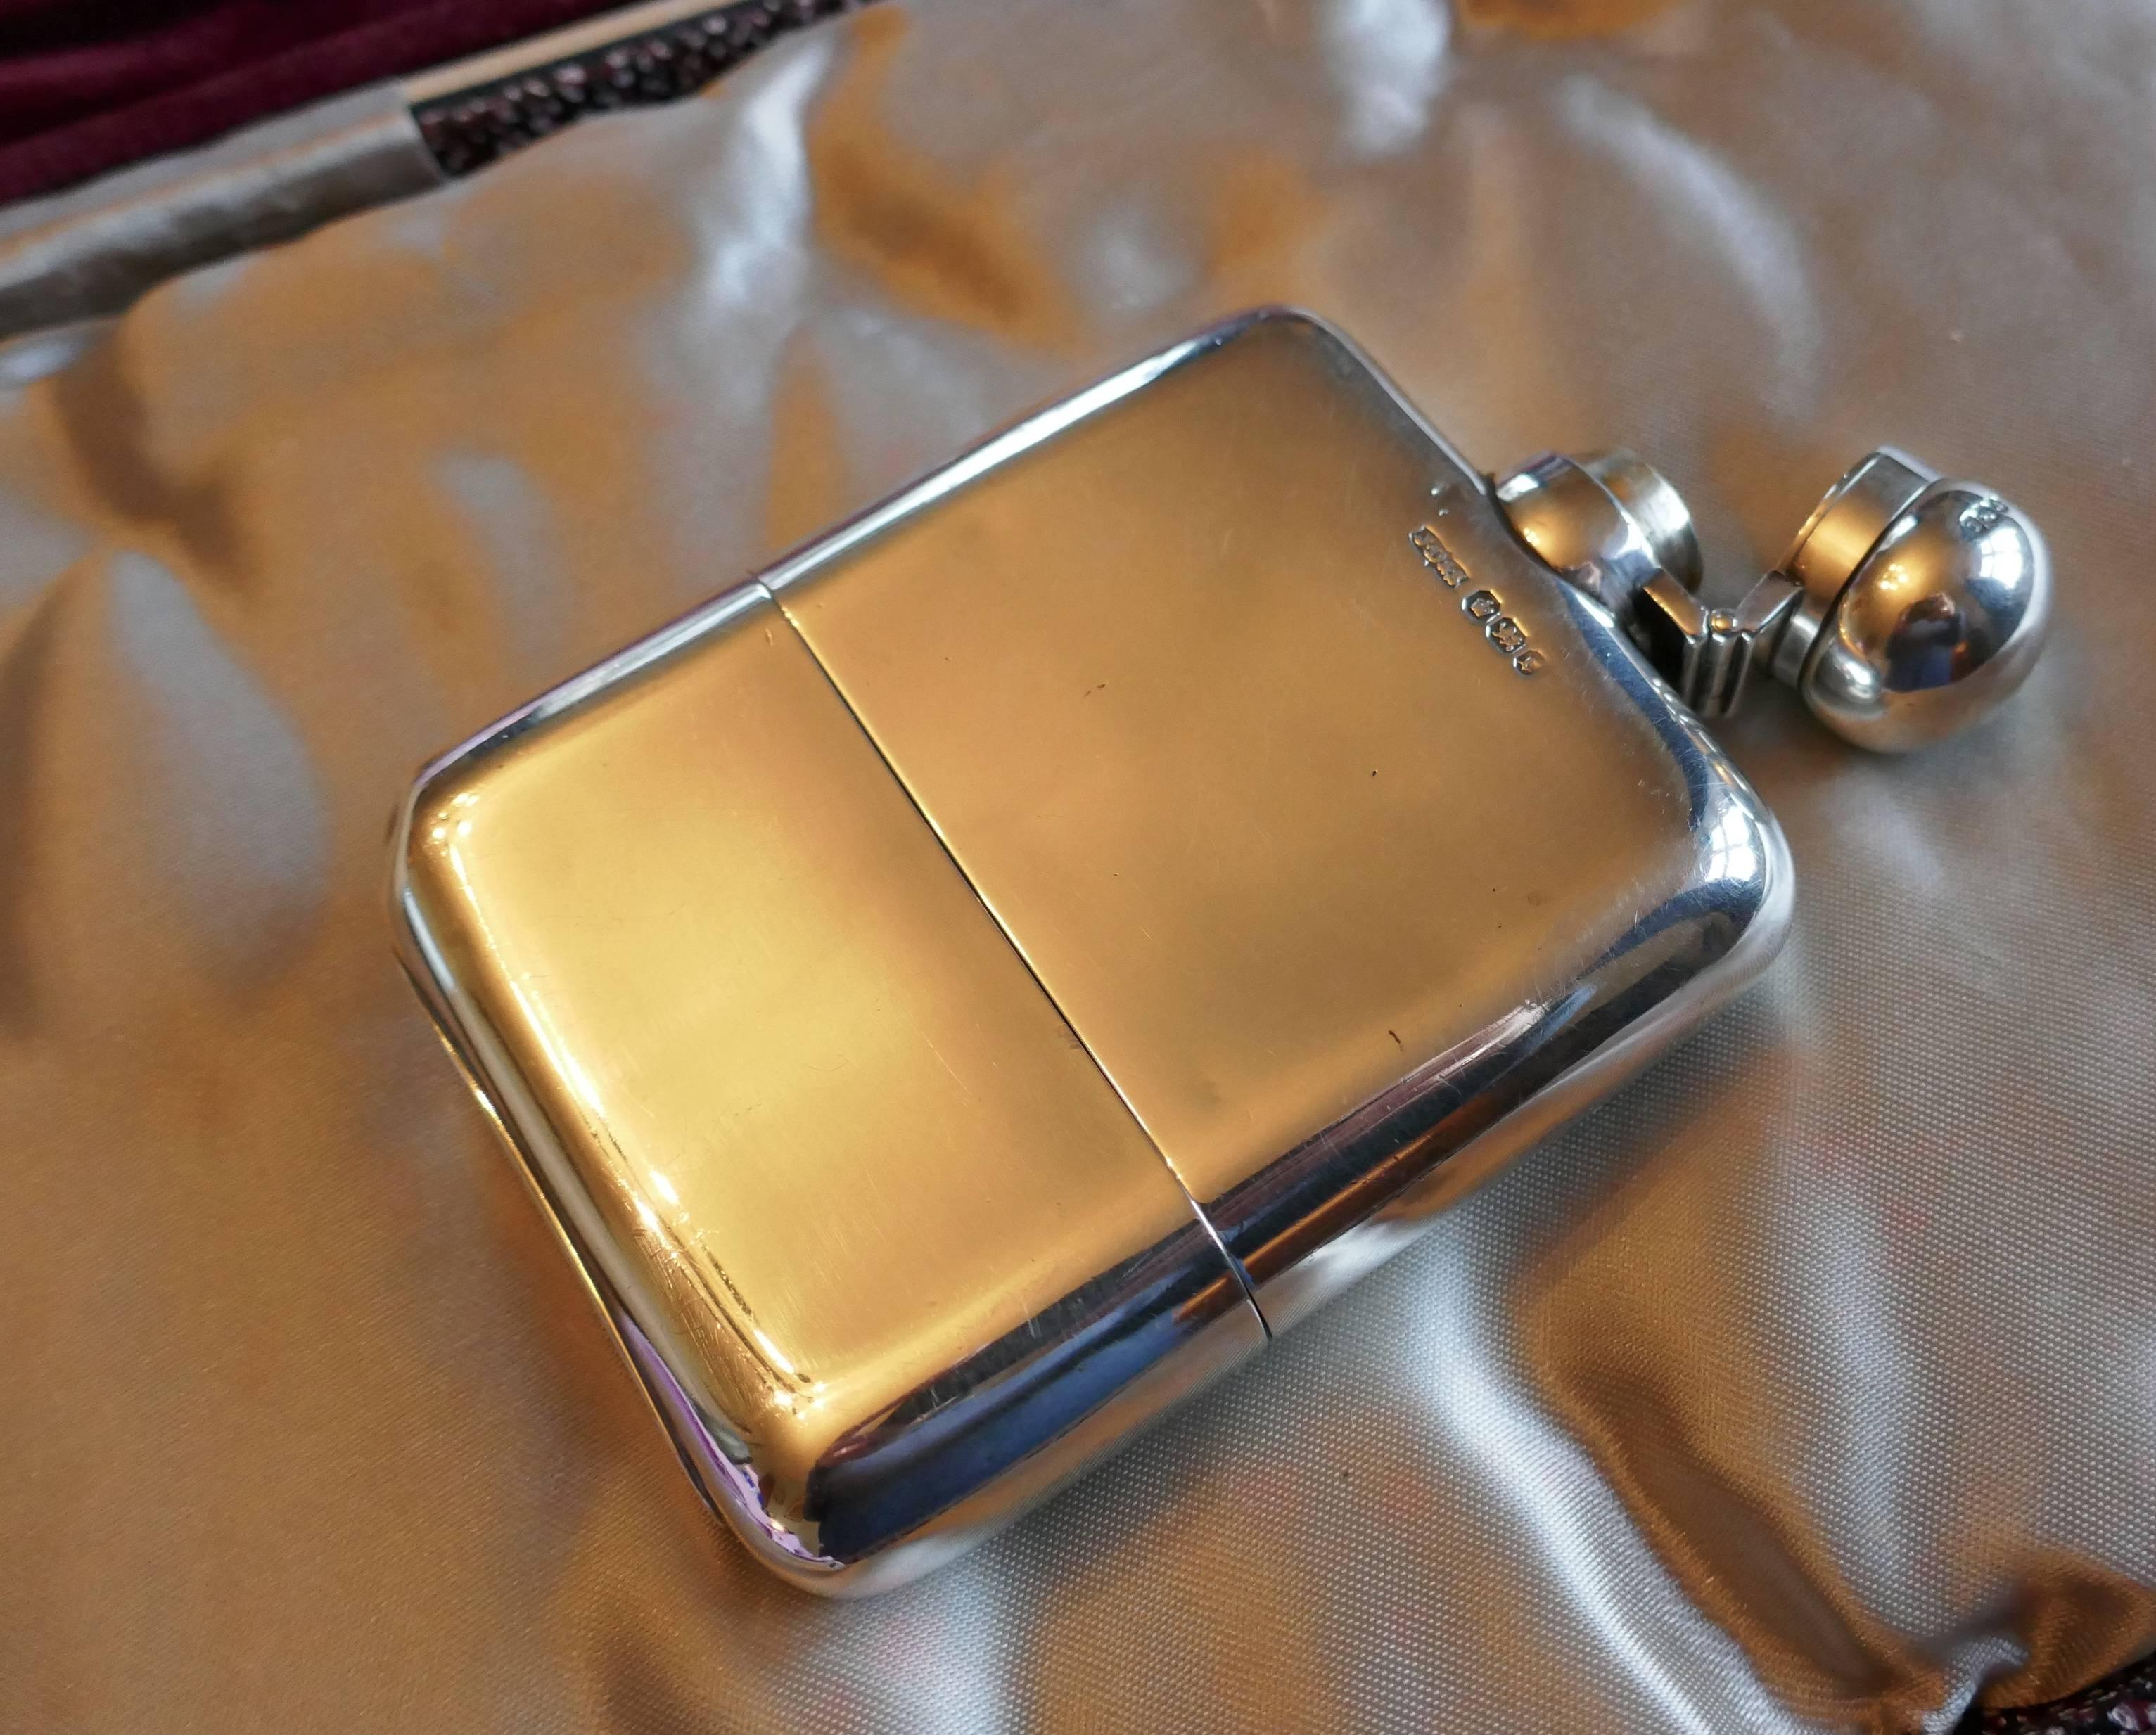 A solid silver hallmarked hip flask and cup by J Dixon, Sheffield, 1909

A lovely rounded piece the body of the flask has a slight curve, the lid is hinged with a screw grip and fits well, and the detachable cup slots on and off nicely. The flask